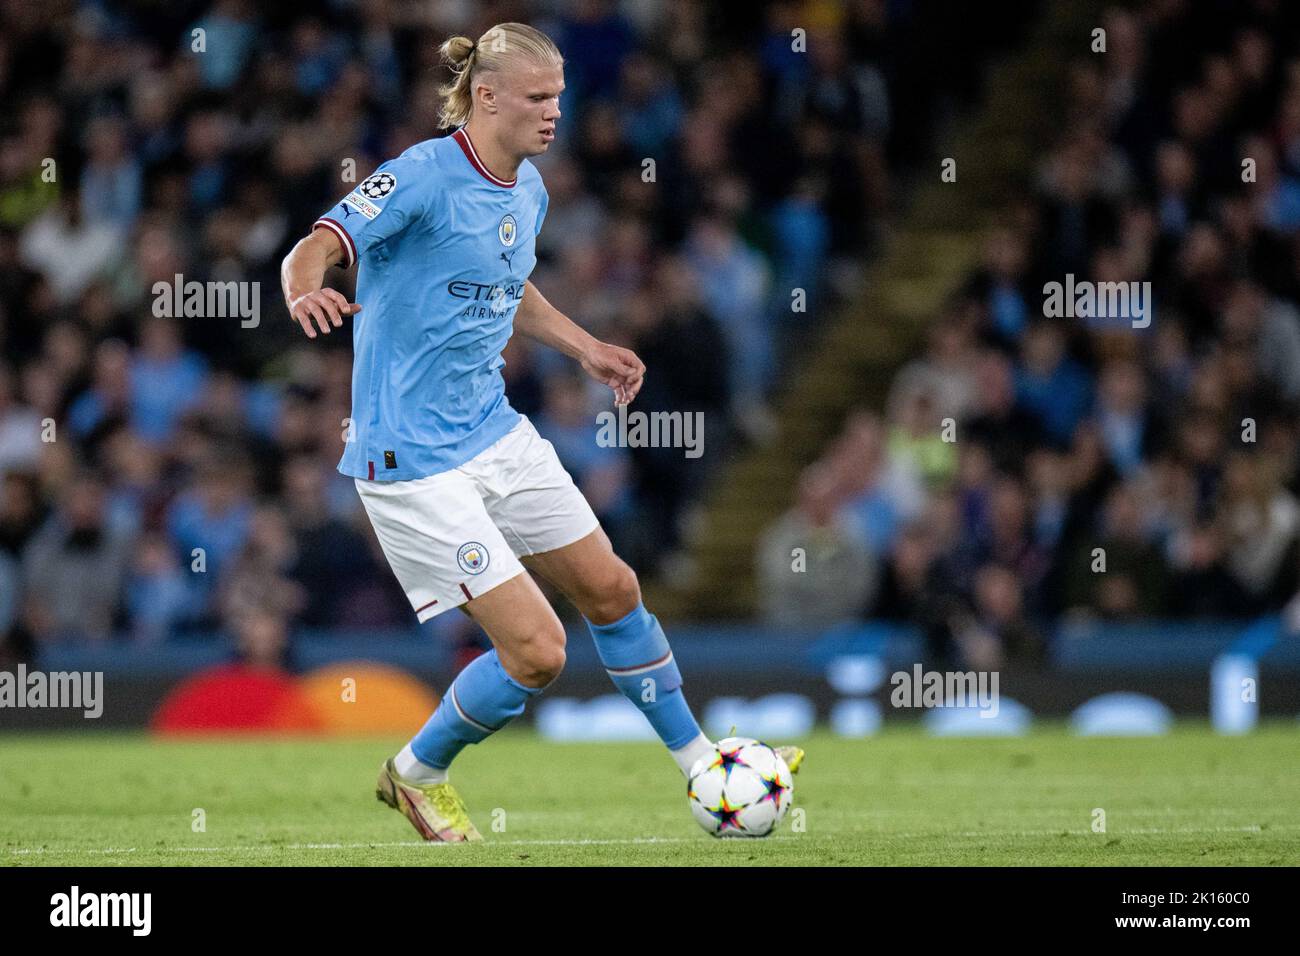 MANCHESTER, ENGLAND - SEPTEMBER 14: Erling Haaland of Manchester City control ball during the UEFA Champions League group G match between Manchester C Stock Photo